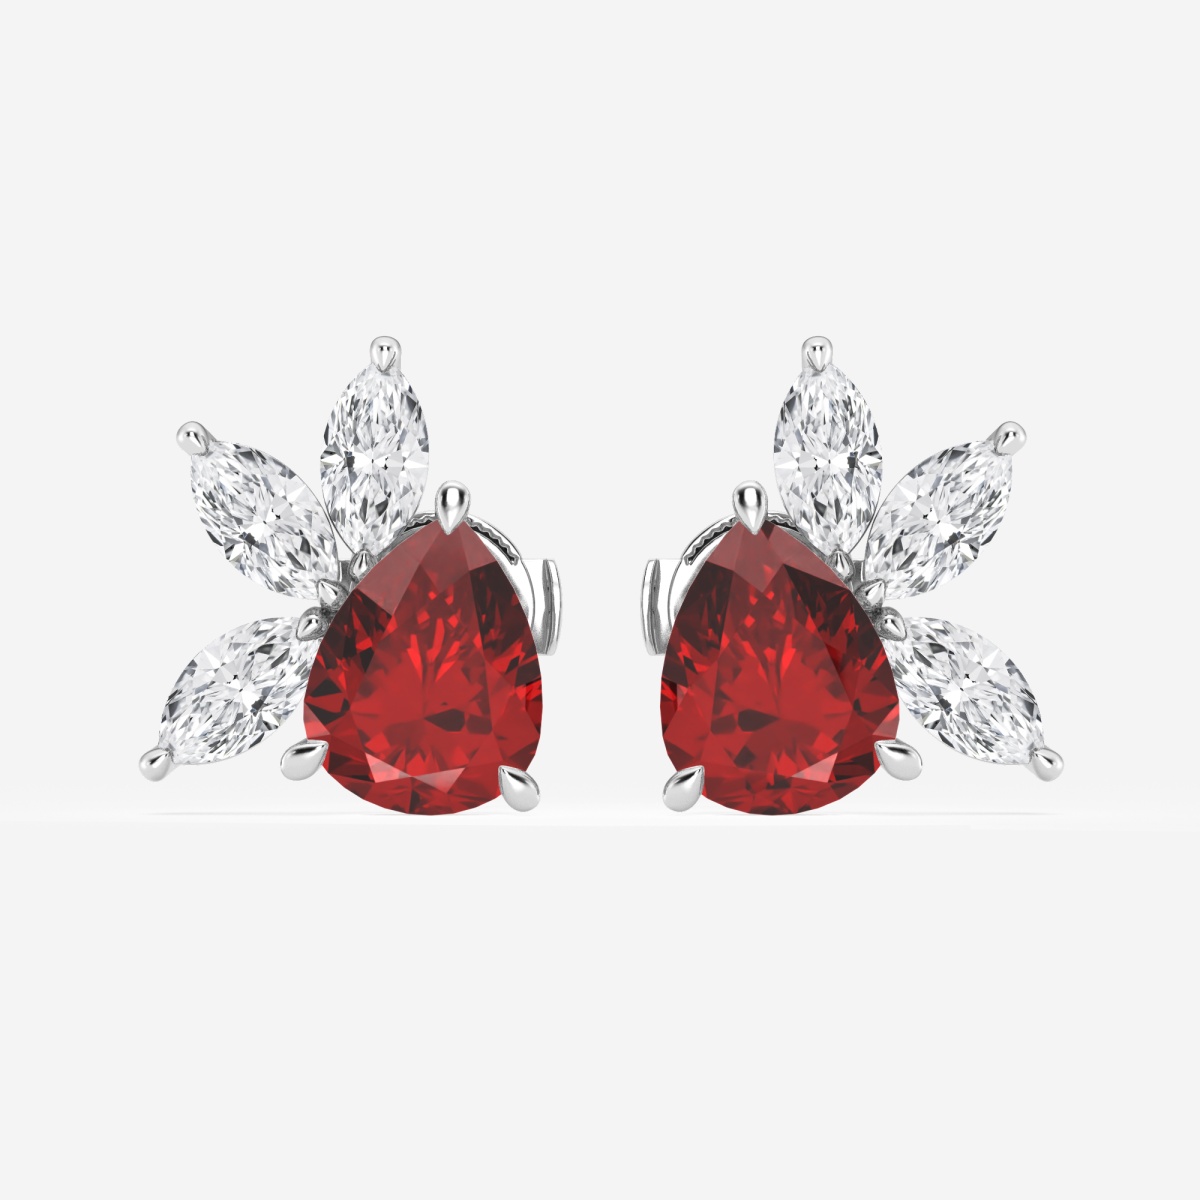 9.0X7.0 mm Pear Shaped Created Ruby and 1 3/4 ctw Marquise Lab 